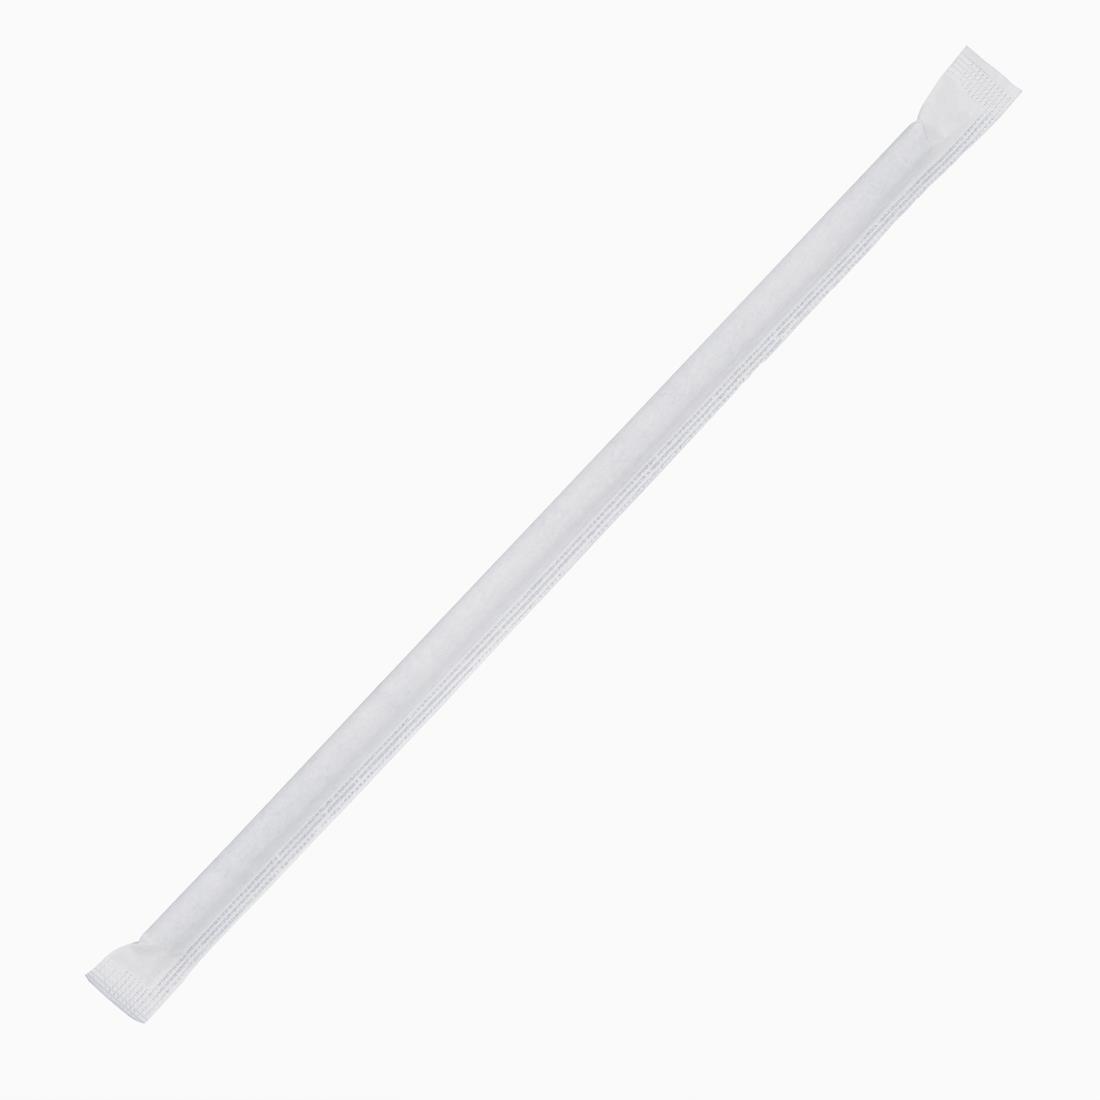 Fiesta Compostable Individually Wrapped Paper Straws Black (Pack of 250) - FP440  - 4